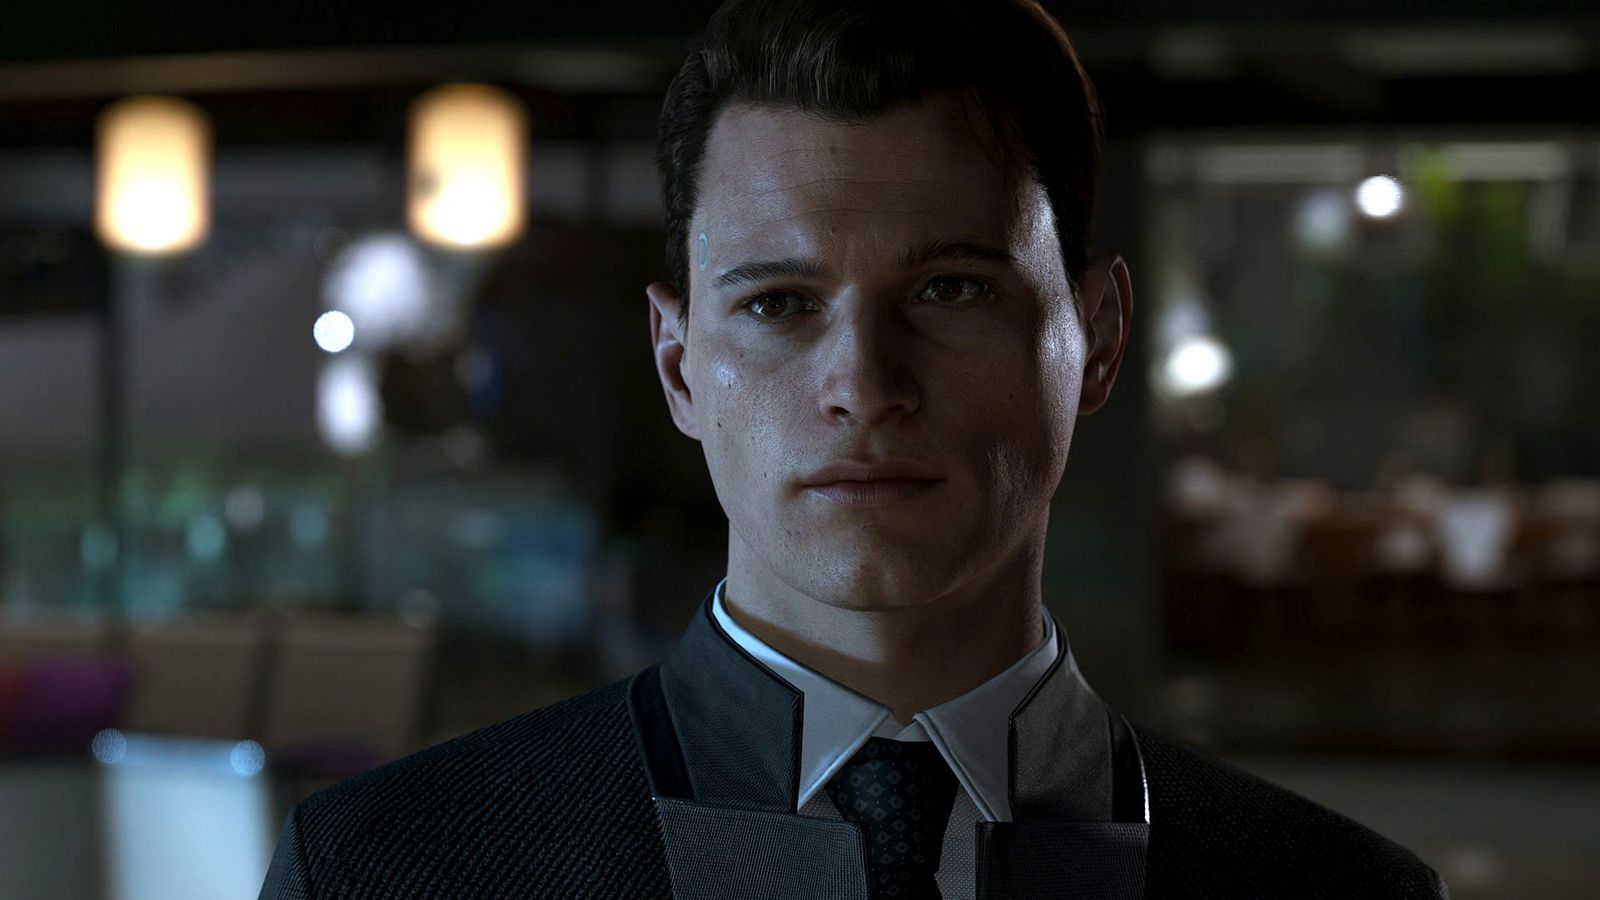 Detroit: Become Human is a moral puzzle of dangerous options